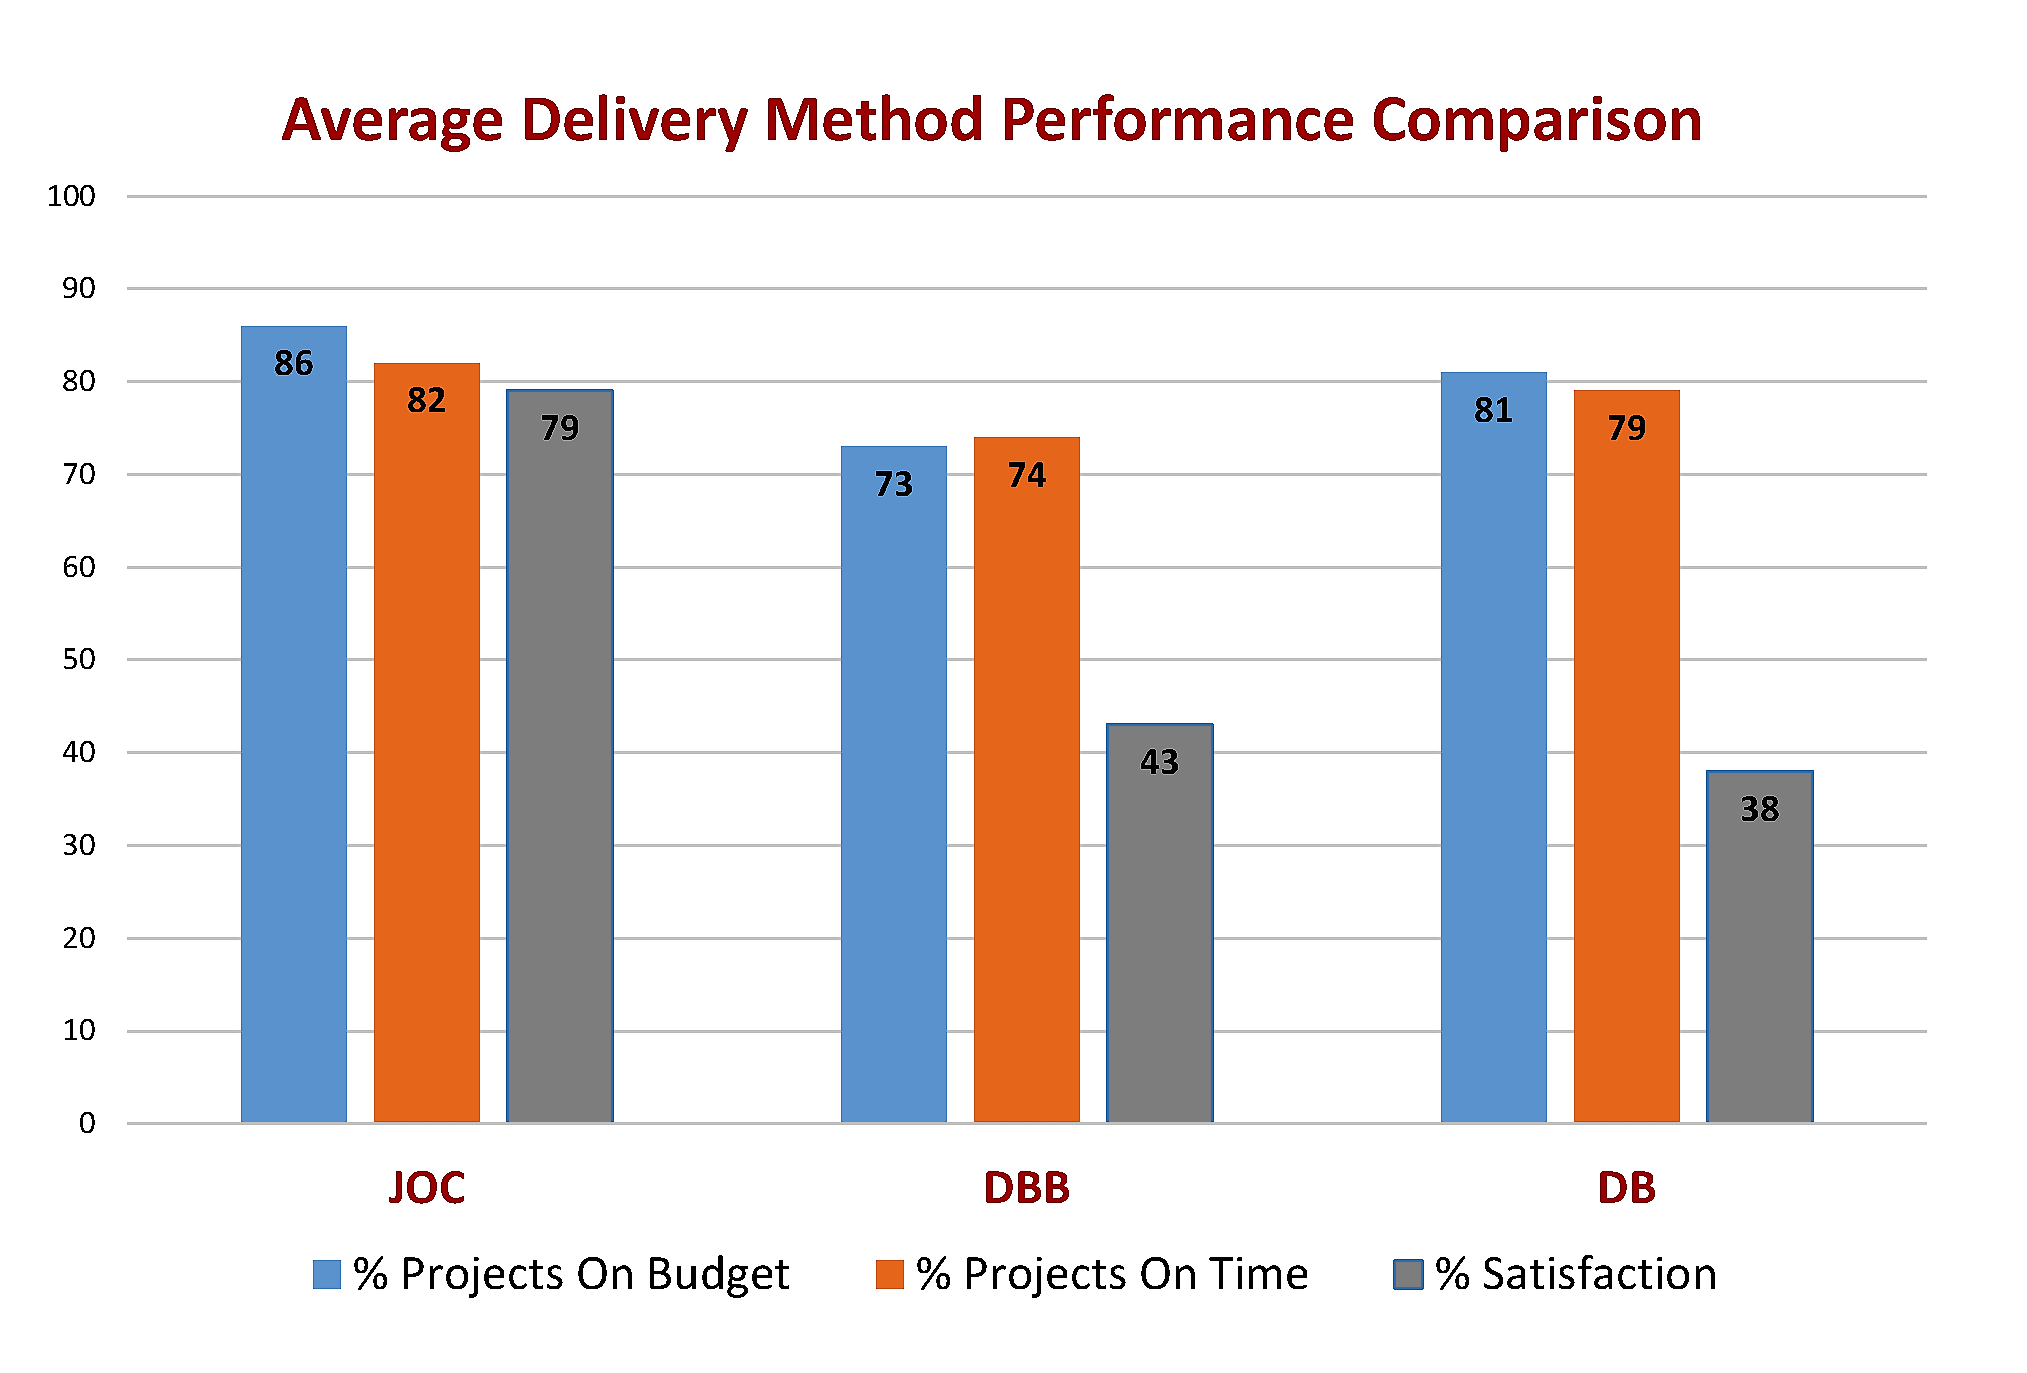 A bar graph showing the average delivery method performance comparisons.